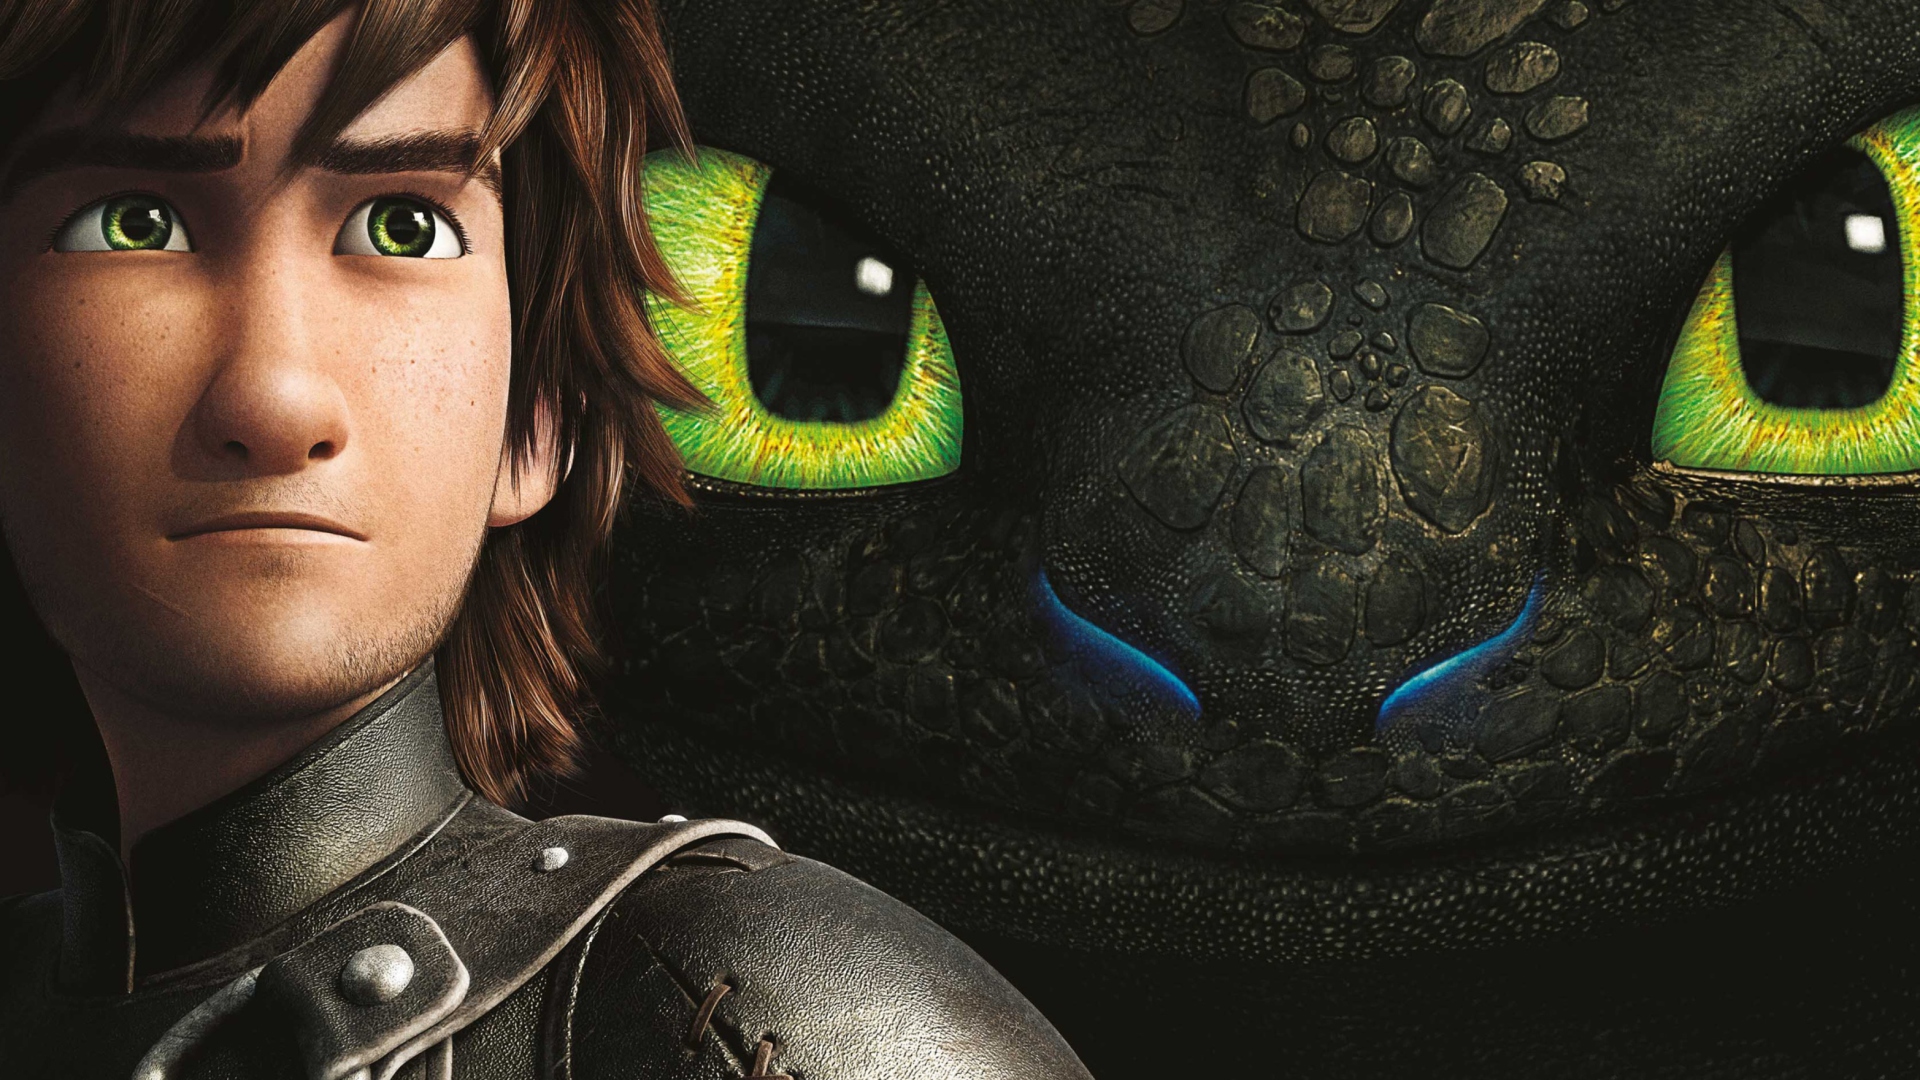 How To Train Your Dragon wallpaper 1920x1080